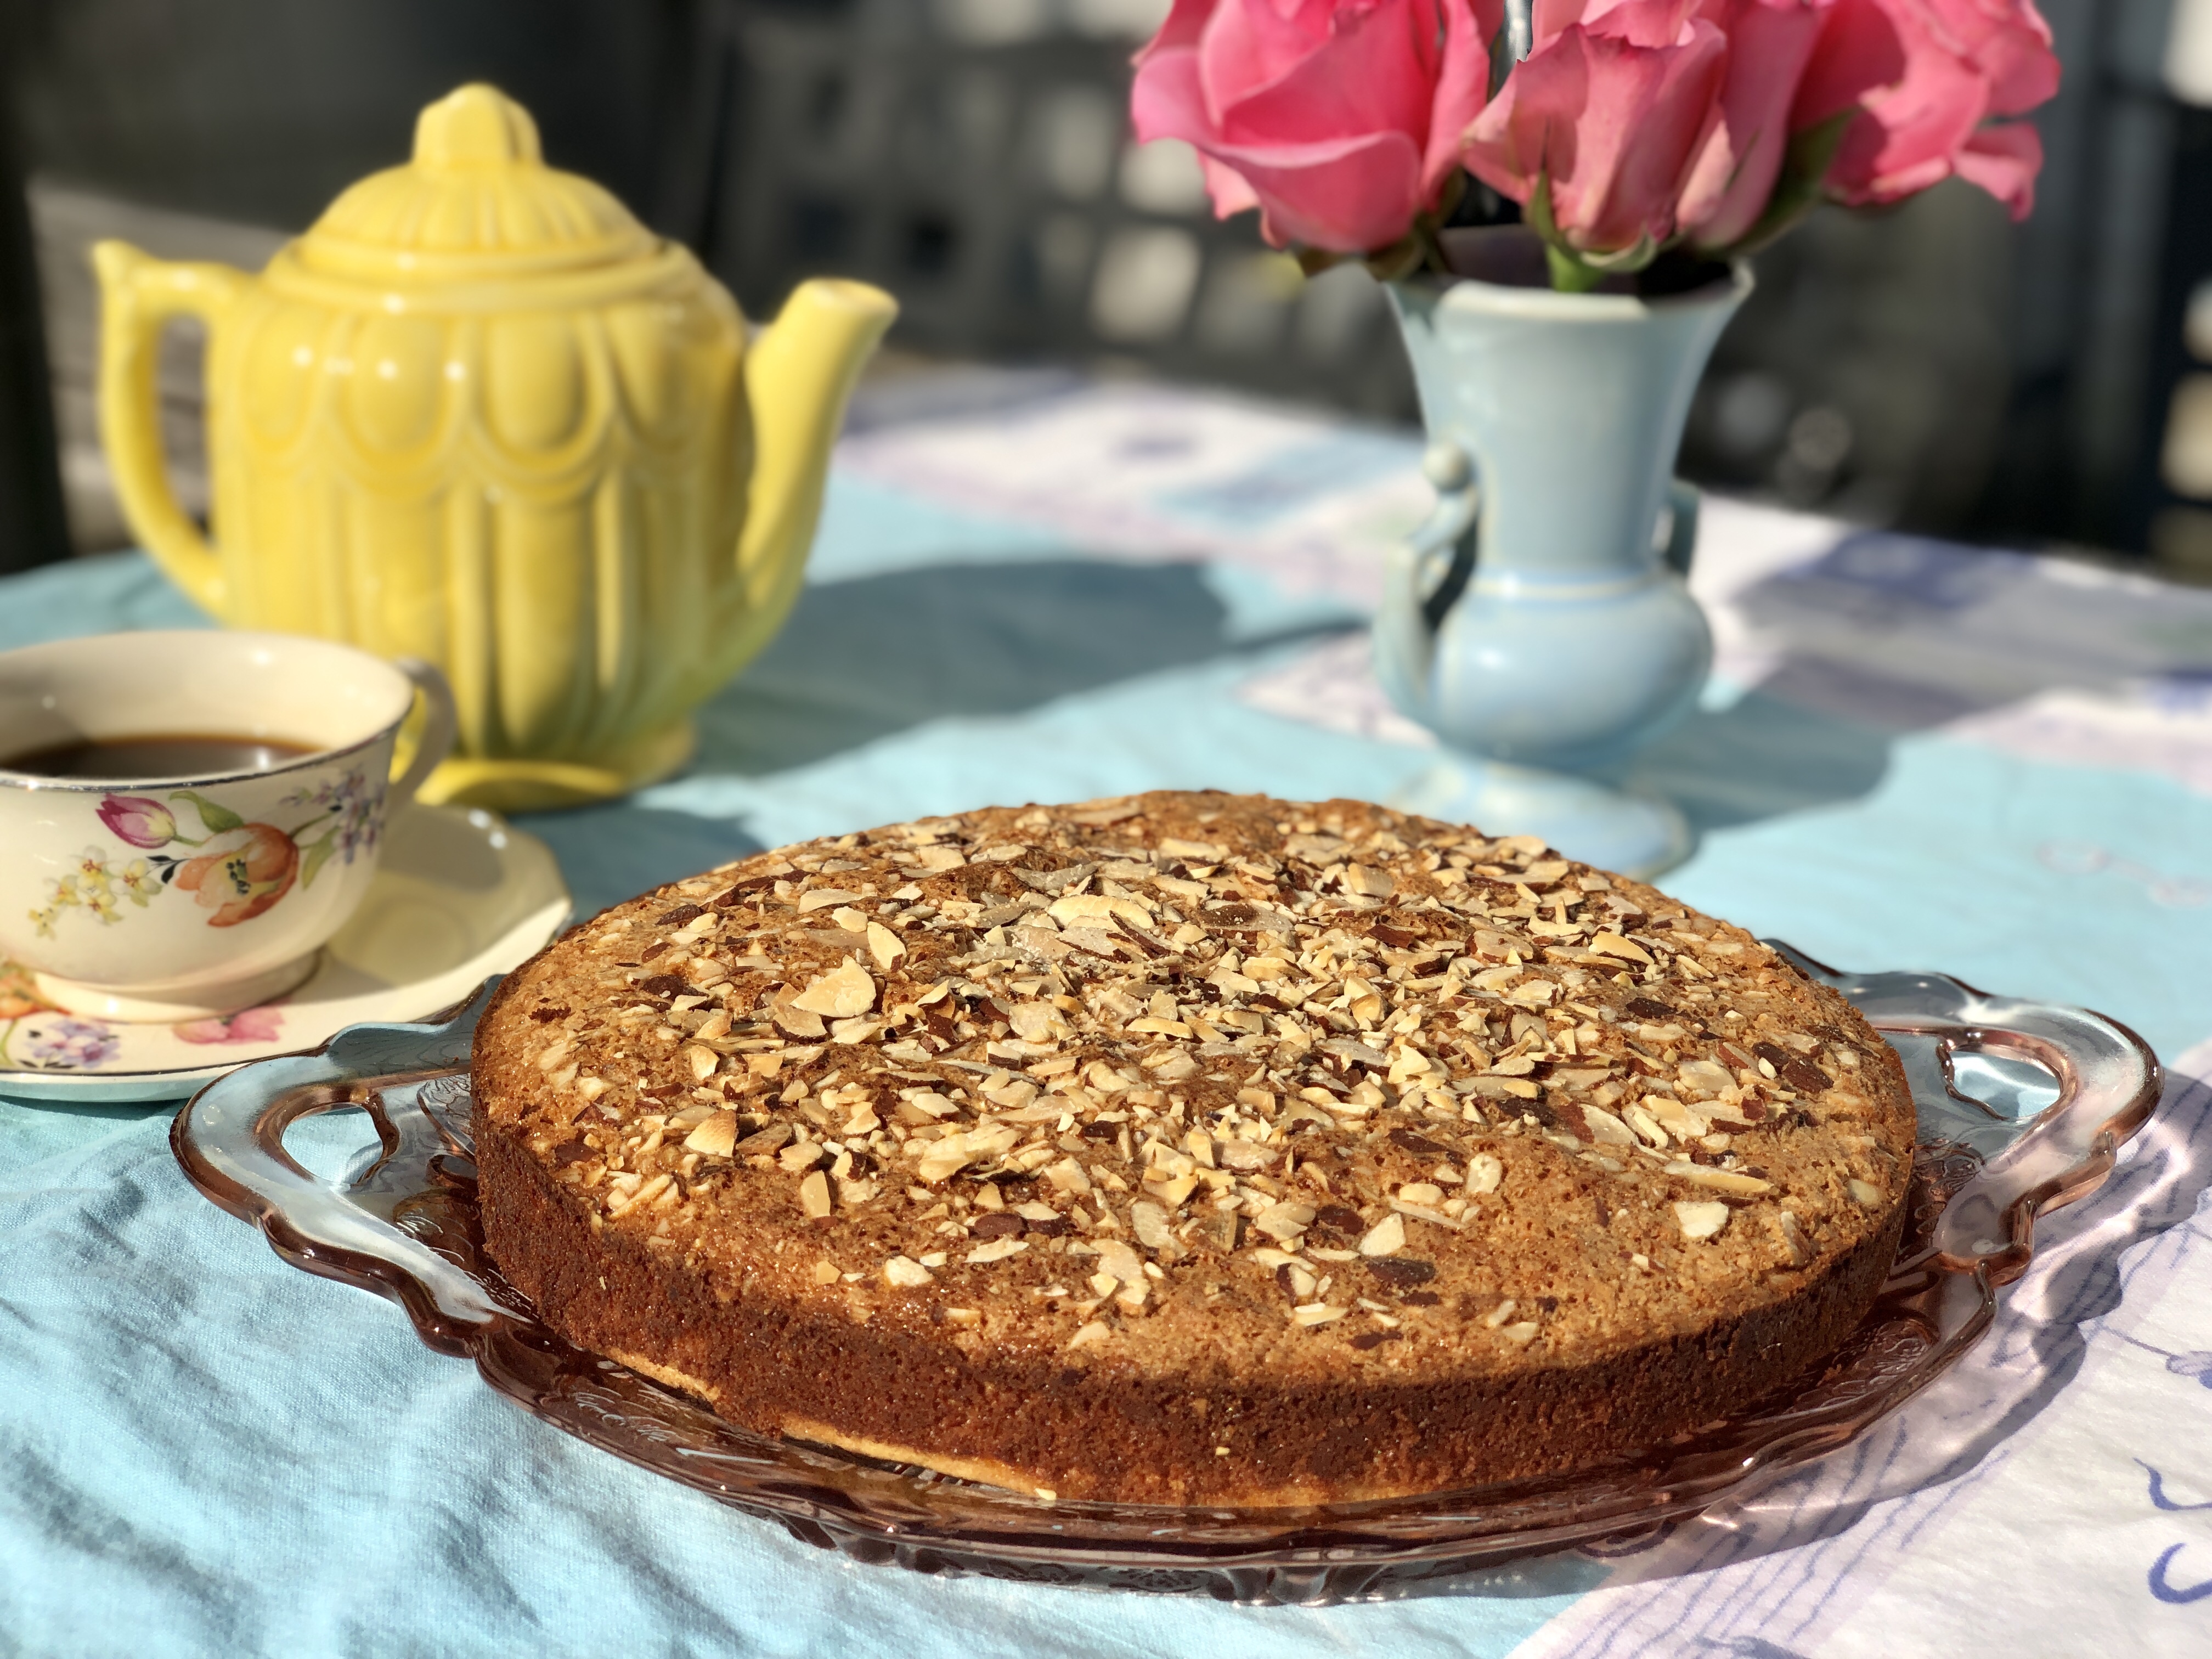 Topped with almonds and turbinado sugar, the Spanish Almond Cake has a crispy top that is delightful to bight into!